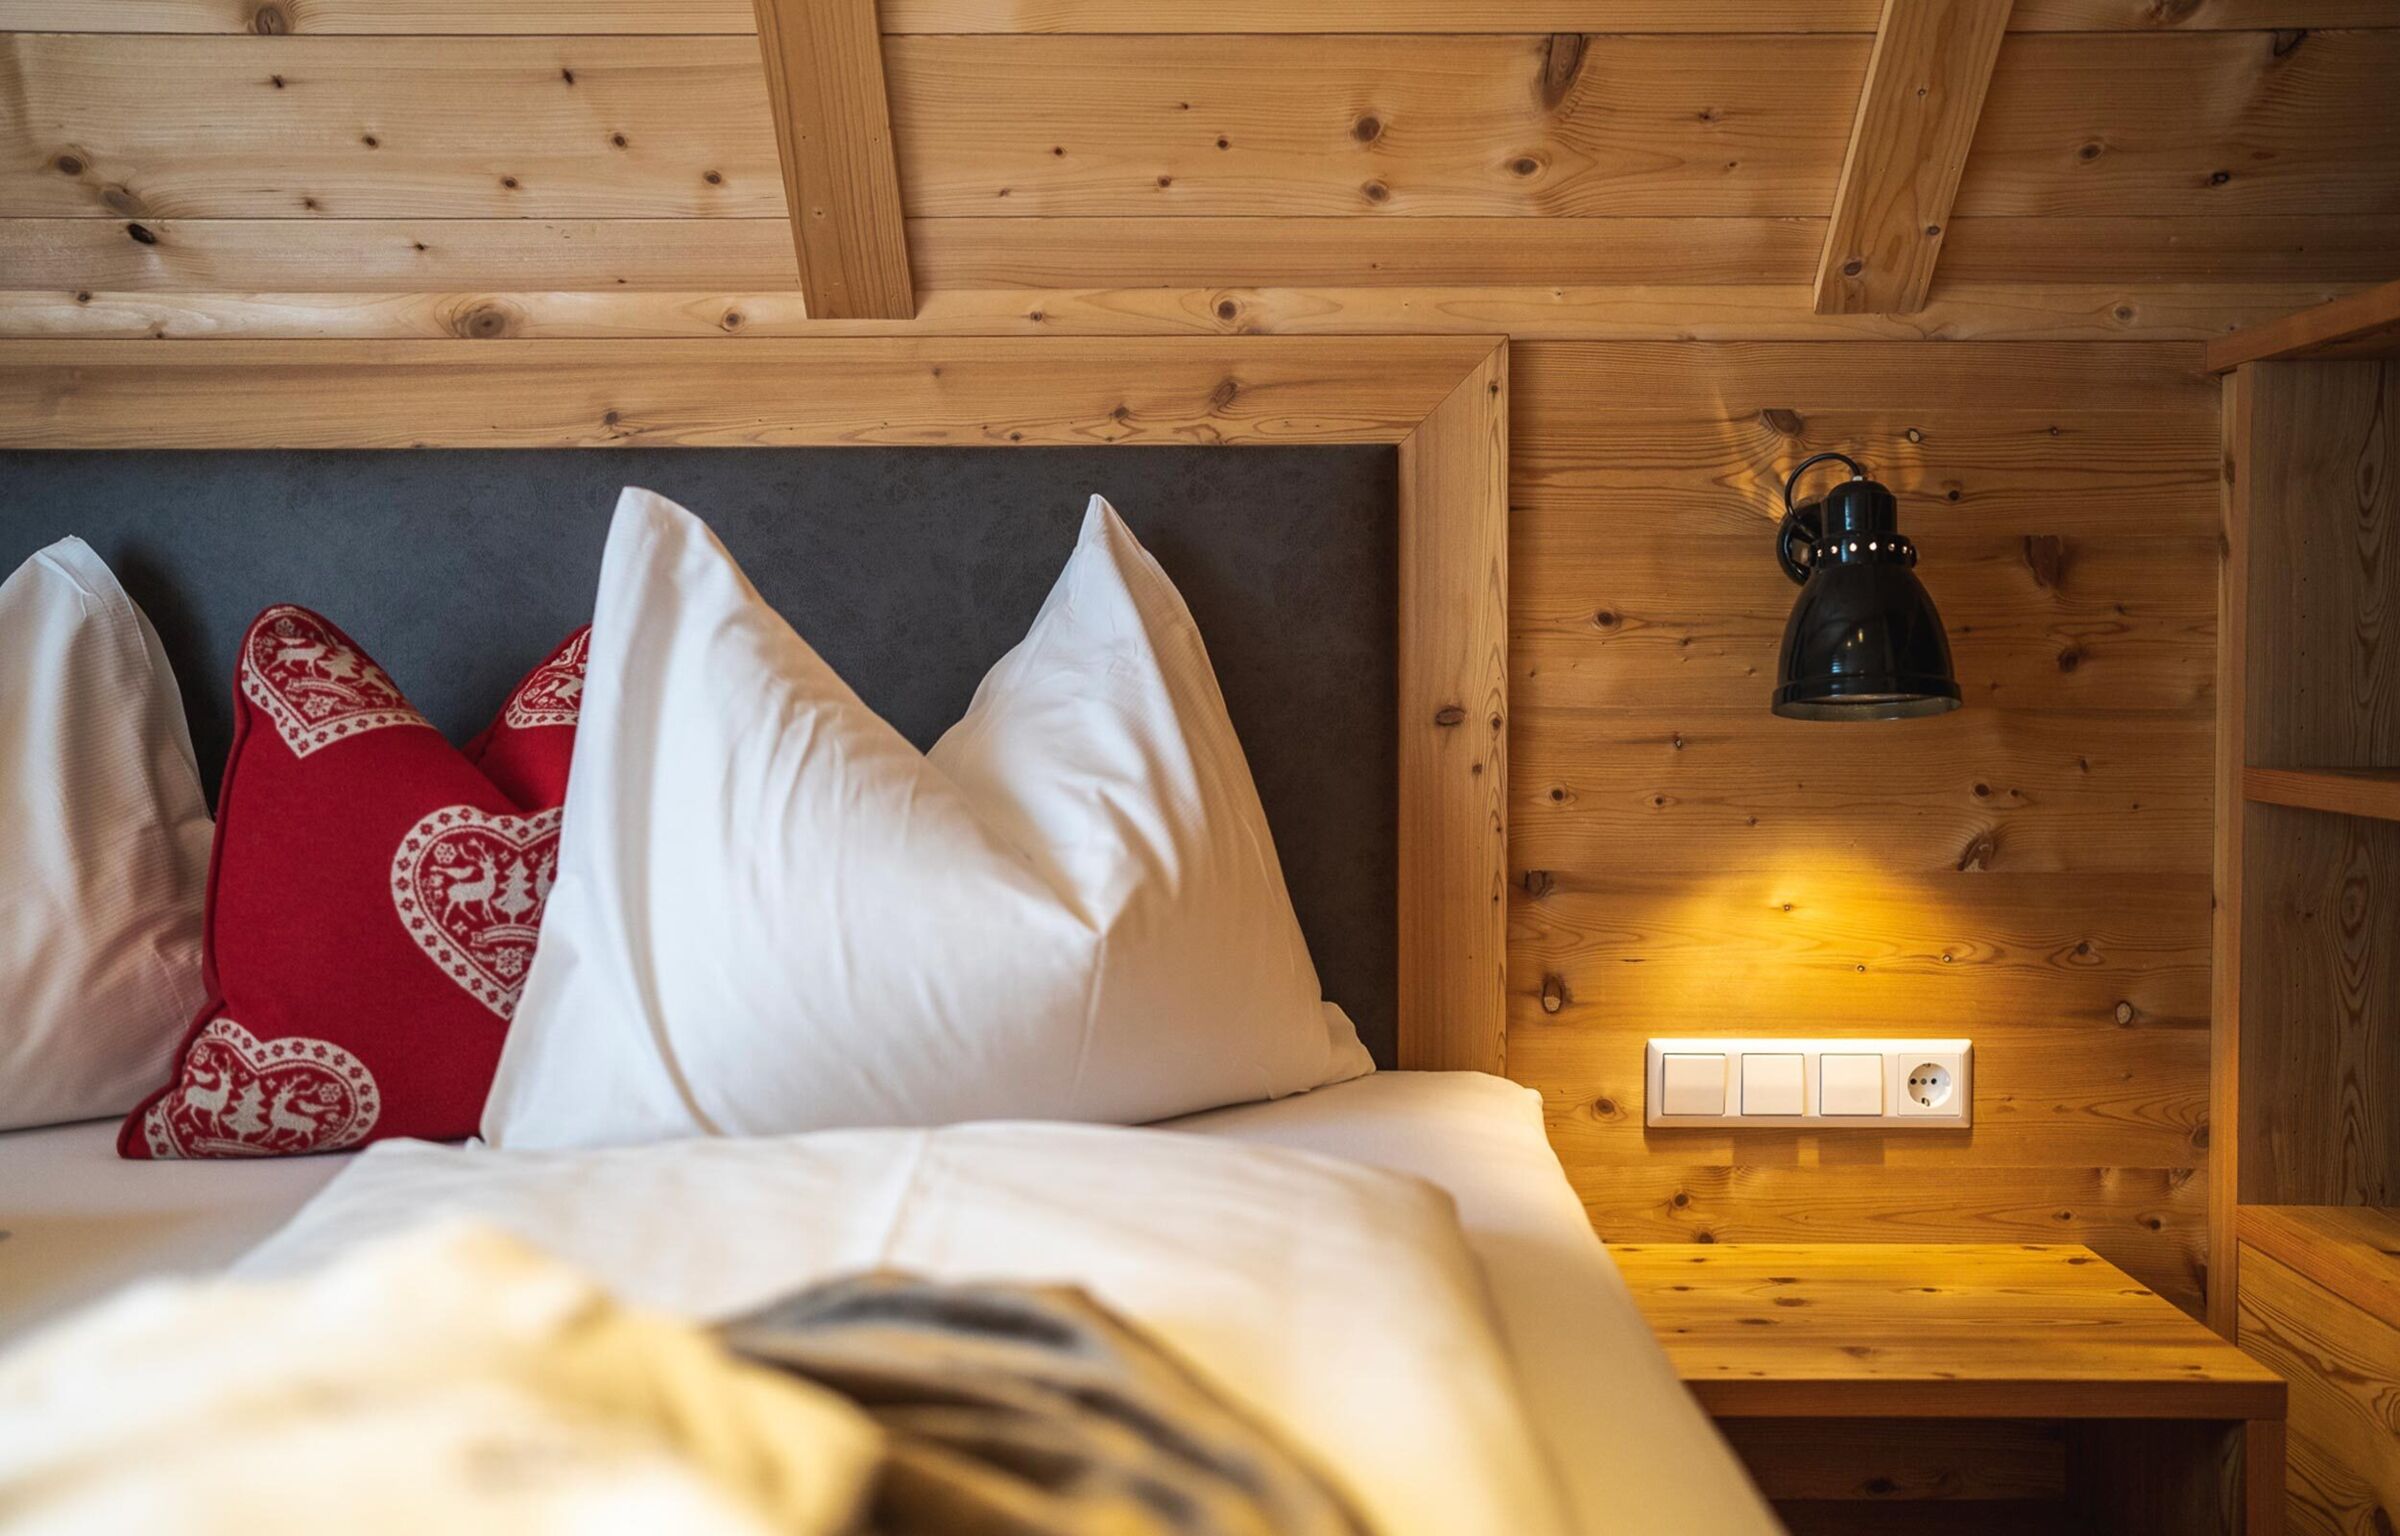 The bedroom in the chalet village in Carinthia